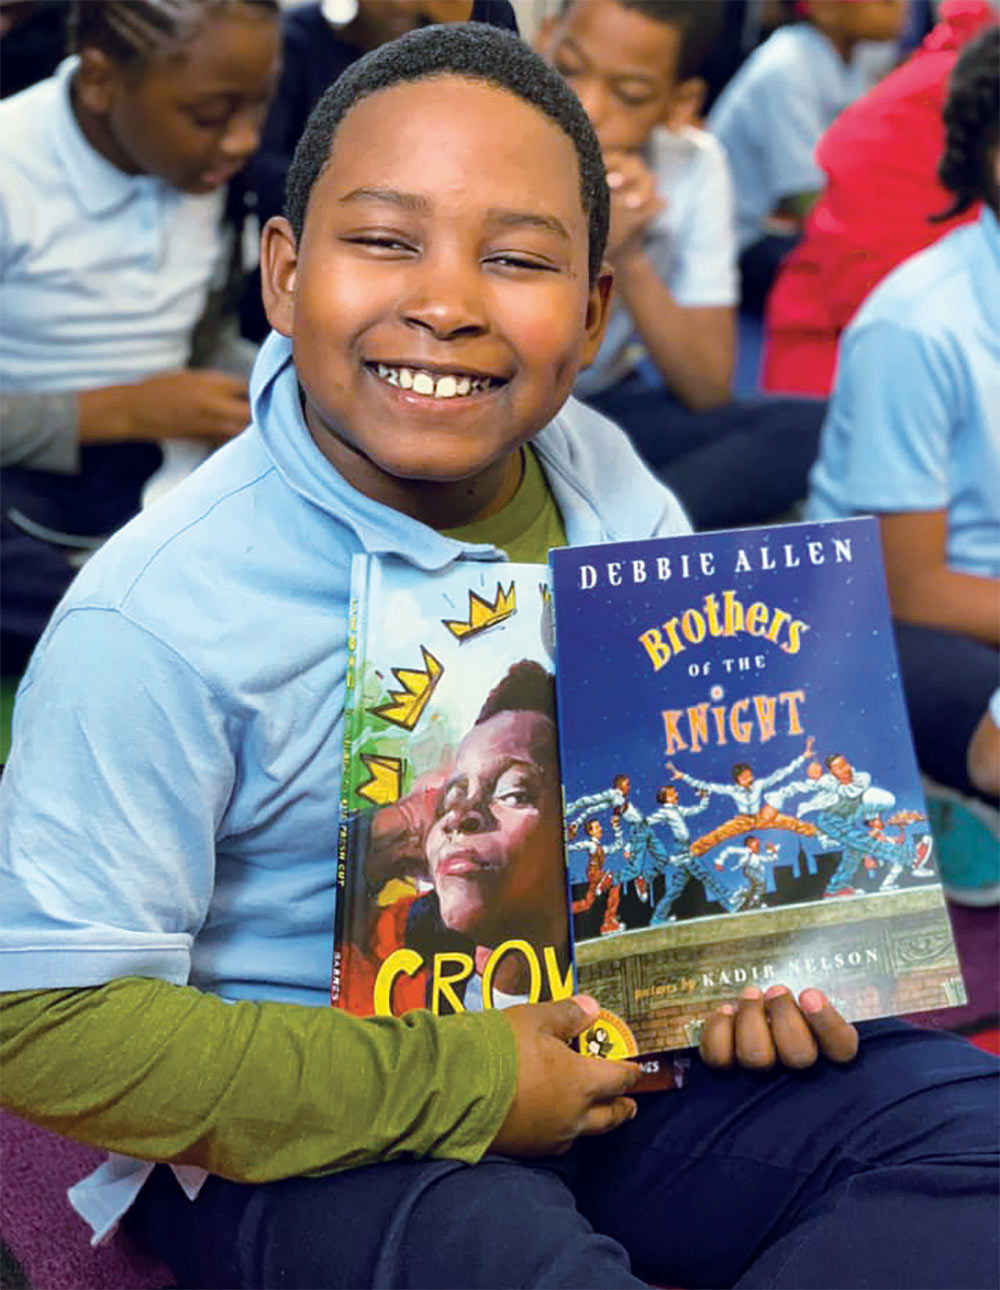 Young boy smiling while holding up books